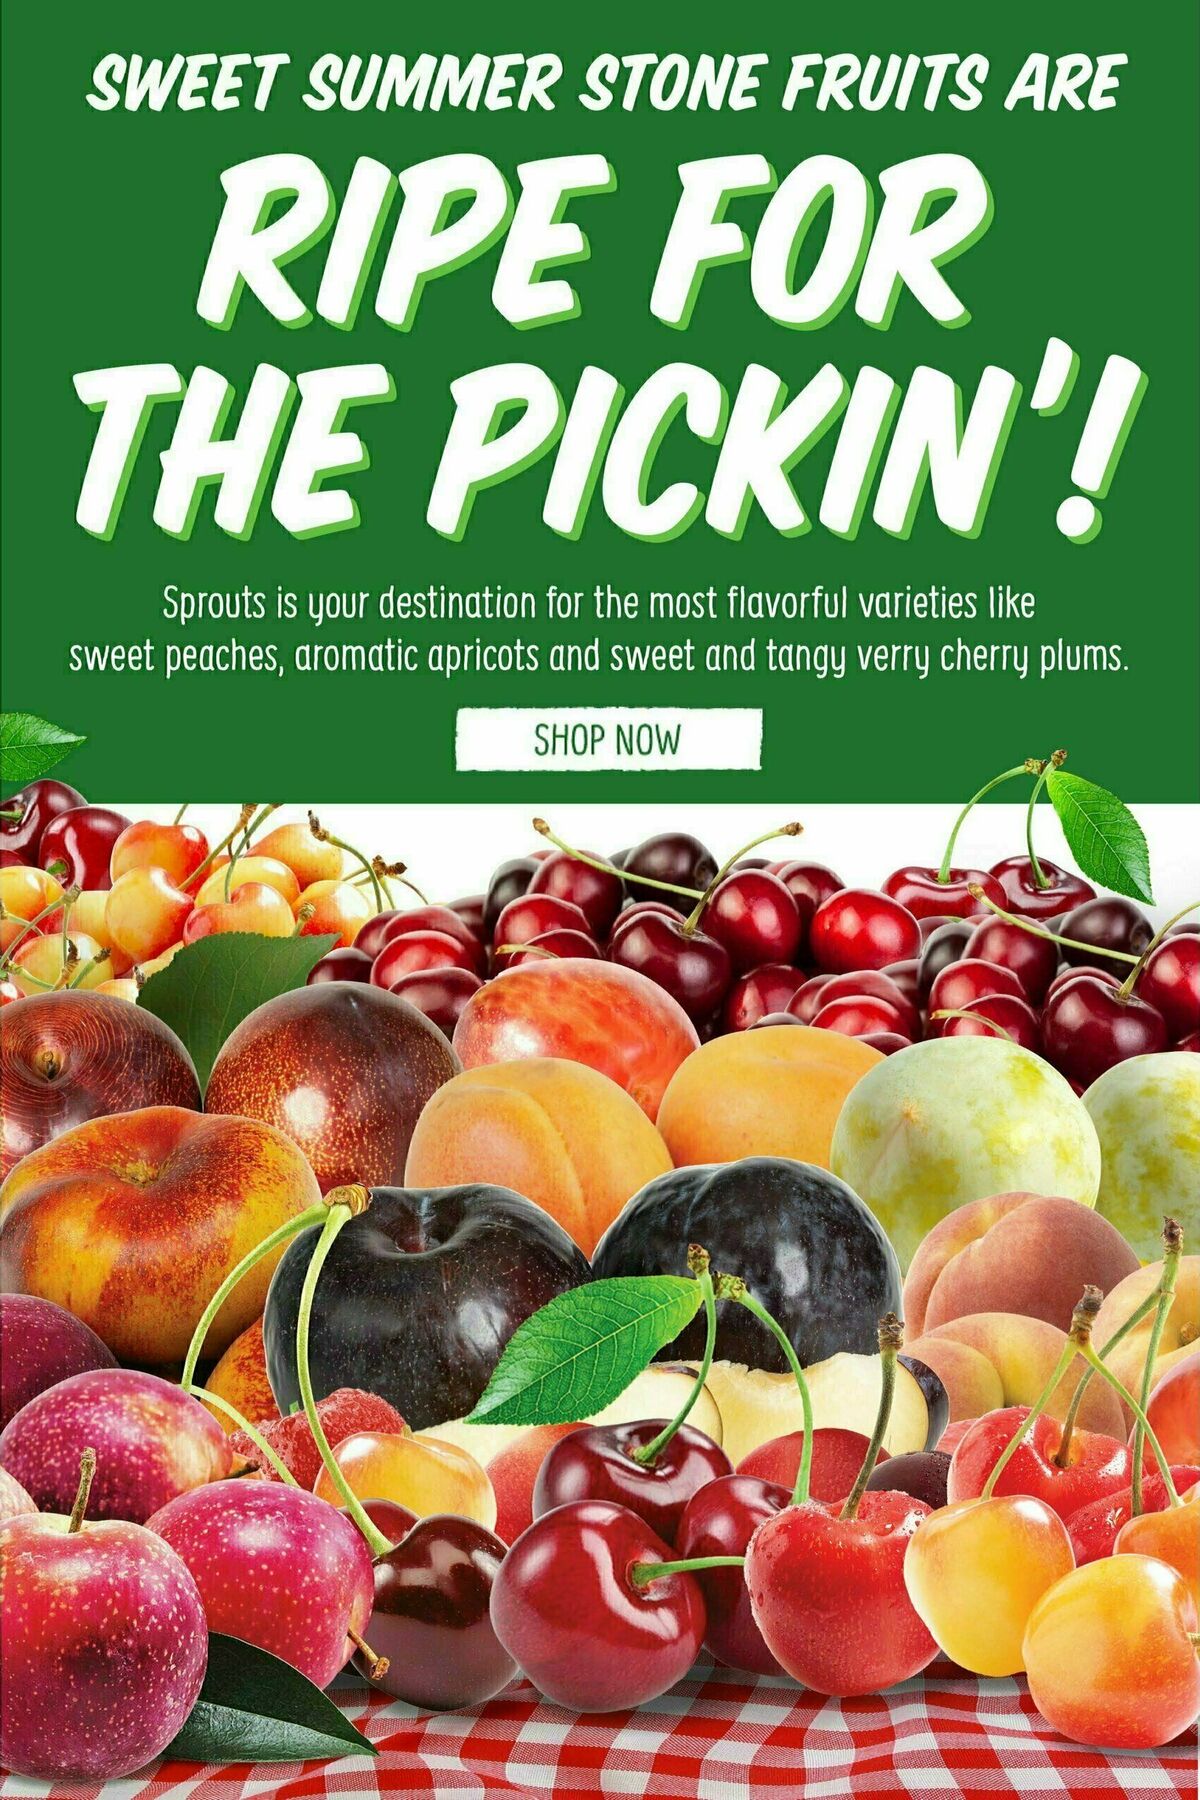 Sprouts Farmers Market Weekly Ad from July 26